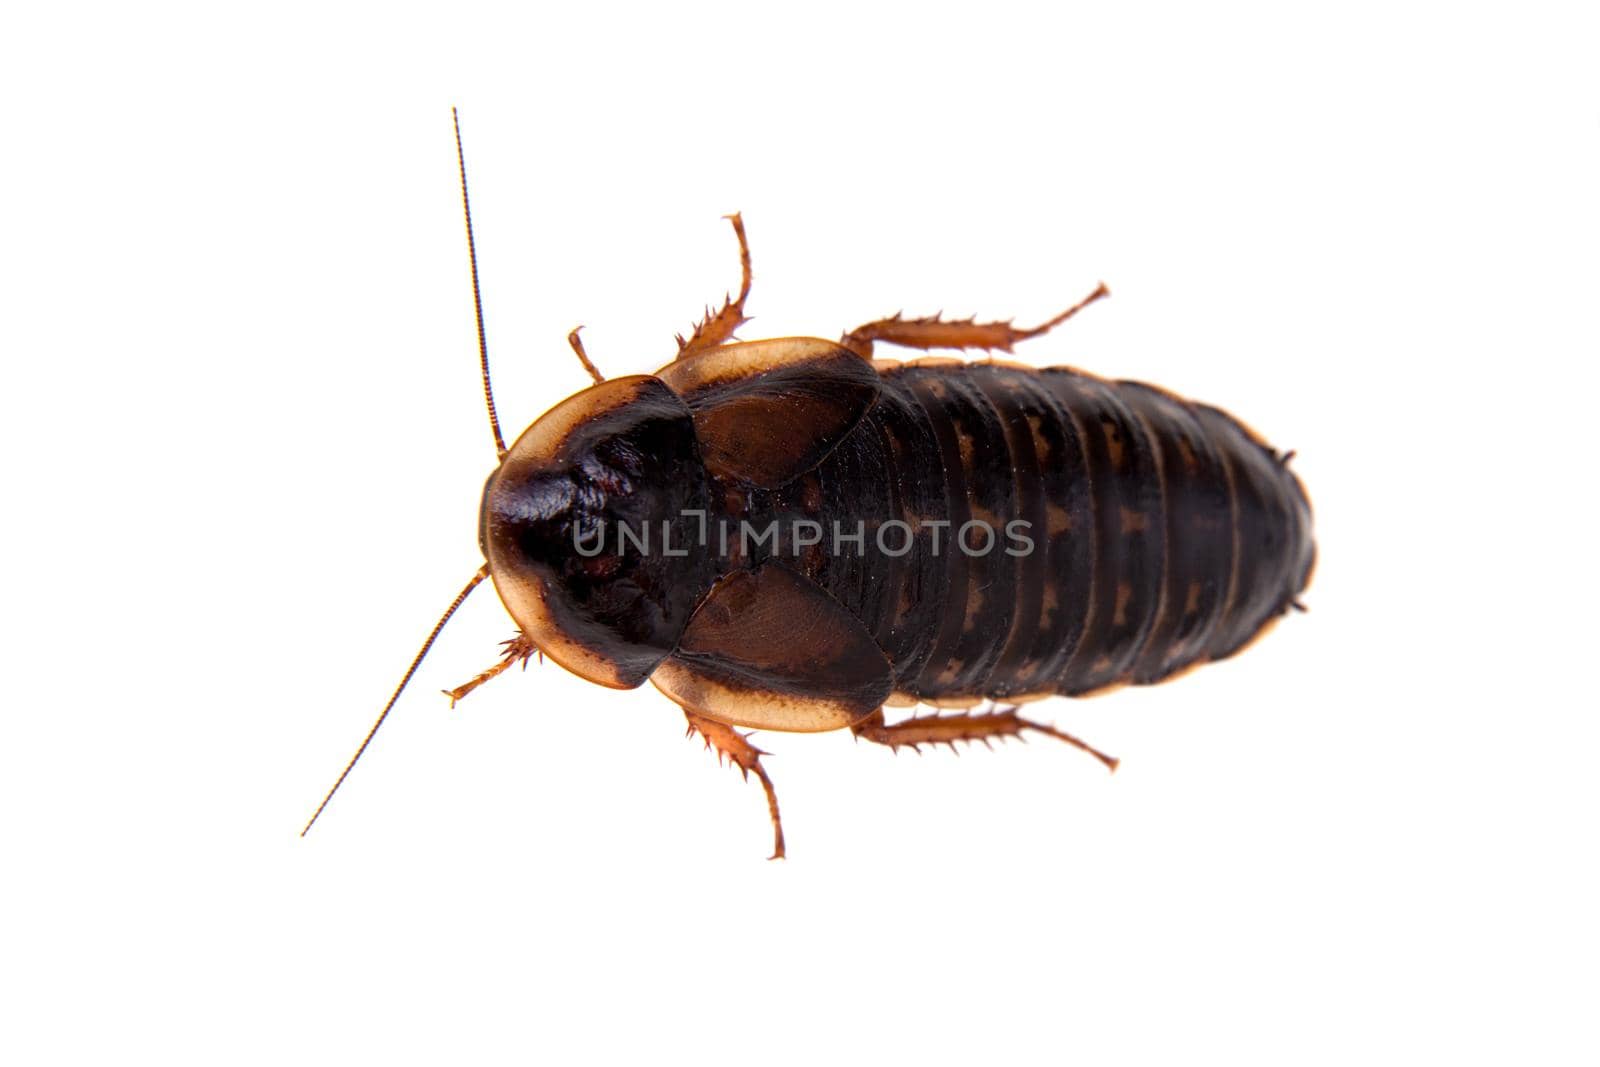 The Dubia roach or Argentinian wood roach, Blaptica dubia, isolated on white background